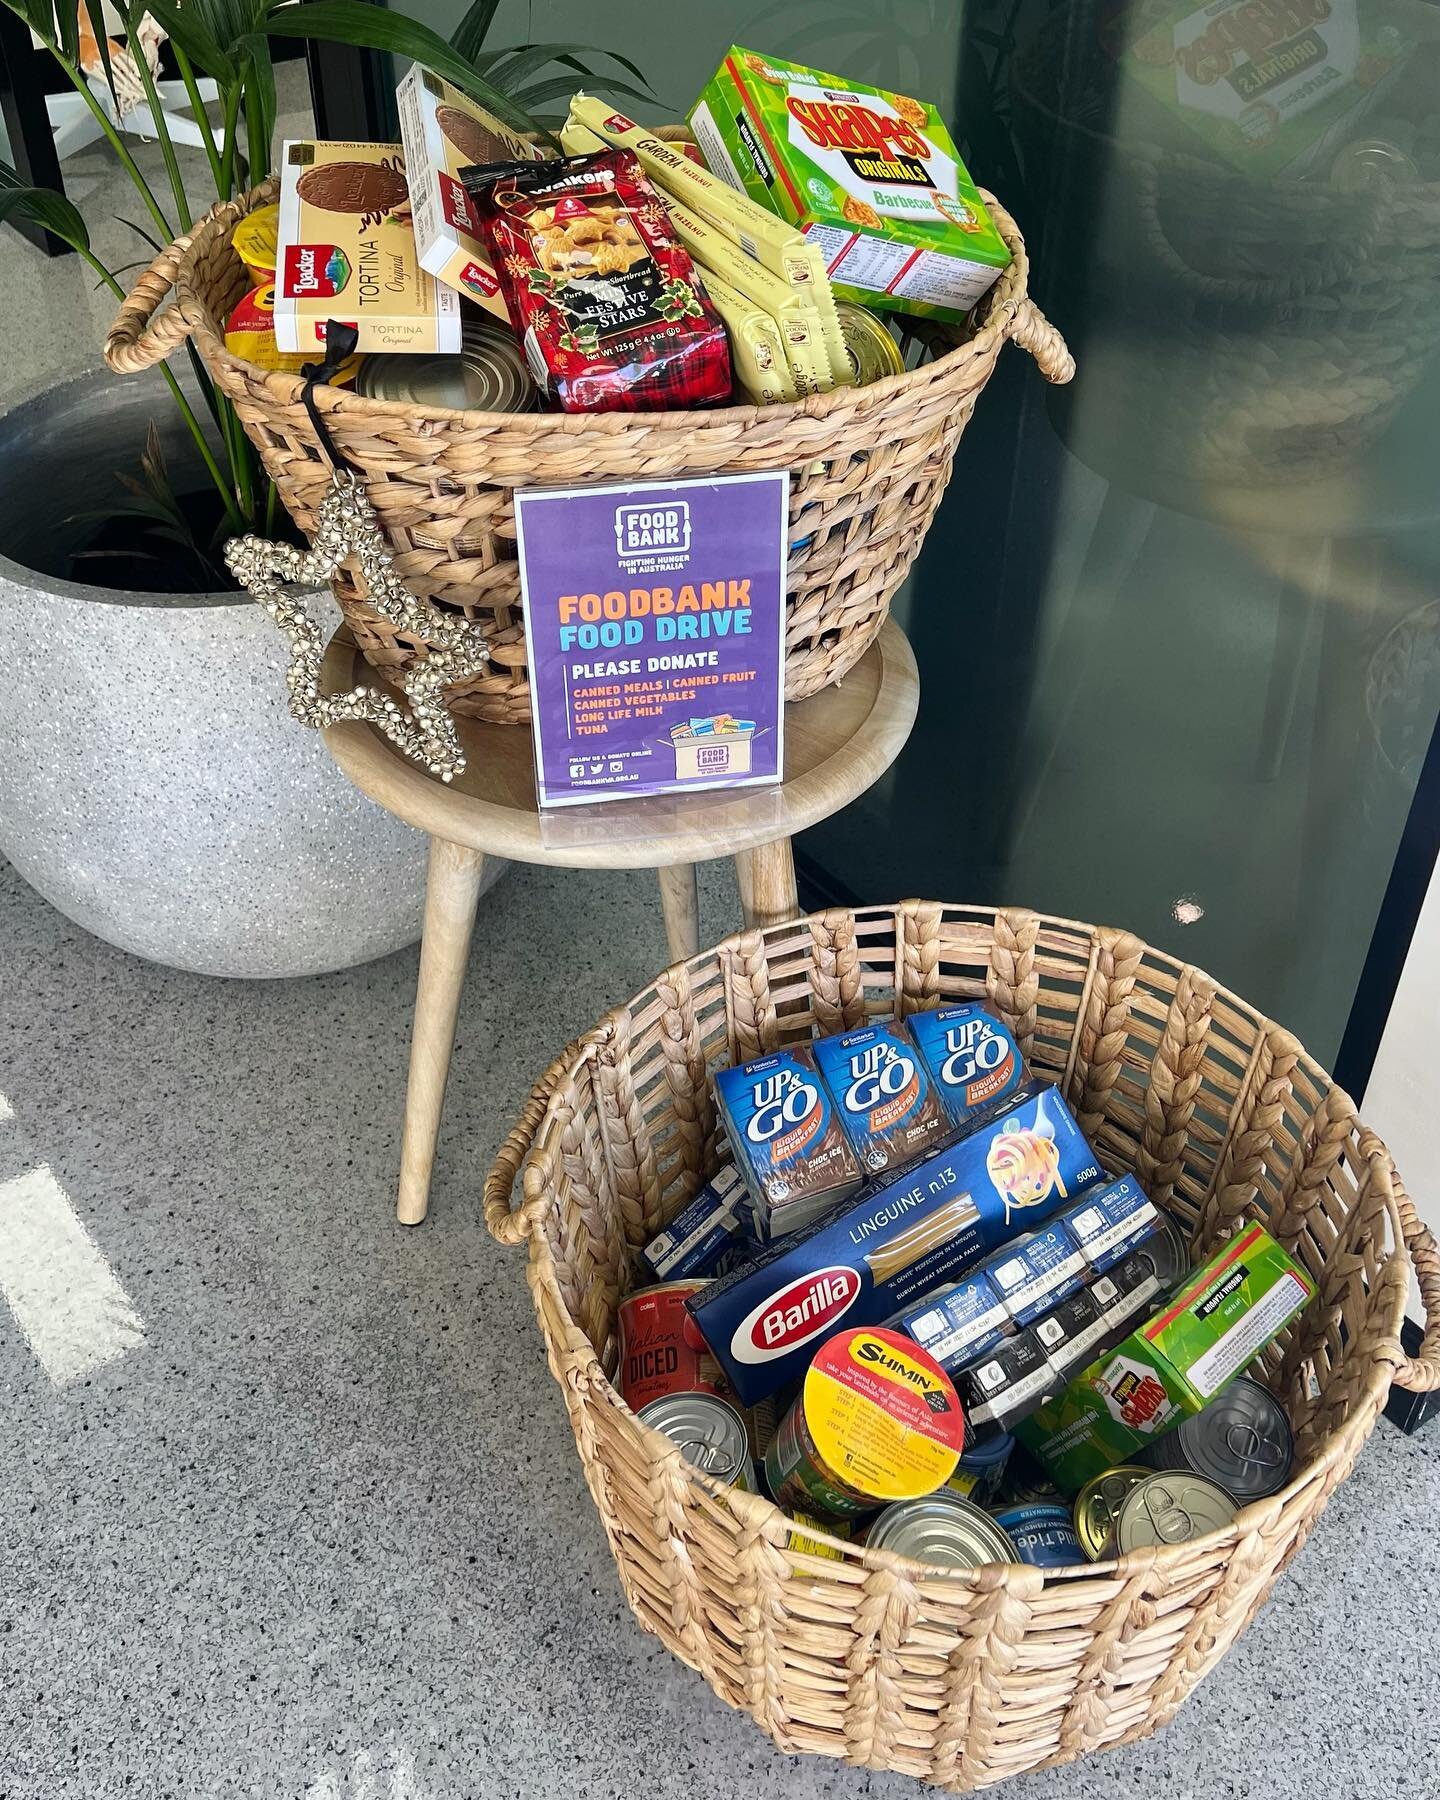 OUR ANNUAL CHRISTMAS FOOD DRIVE IS HERE! 🎄🥫🍫
During the holiday season we donate directly to Foodbank WA to help those who go without. 
Help us by bringing as many non-perishable items to your next appointment! Our baskets will be out in the clini